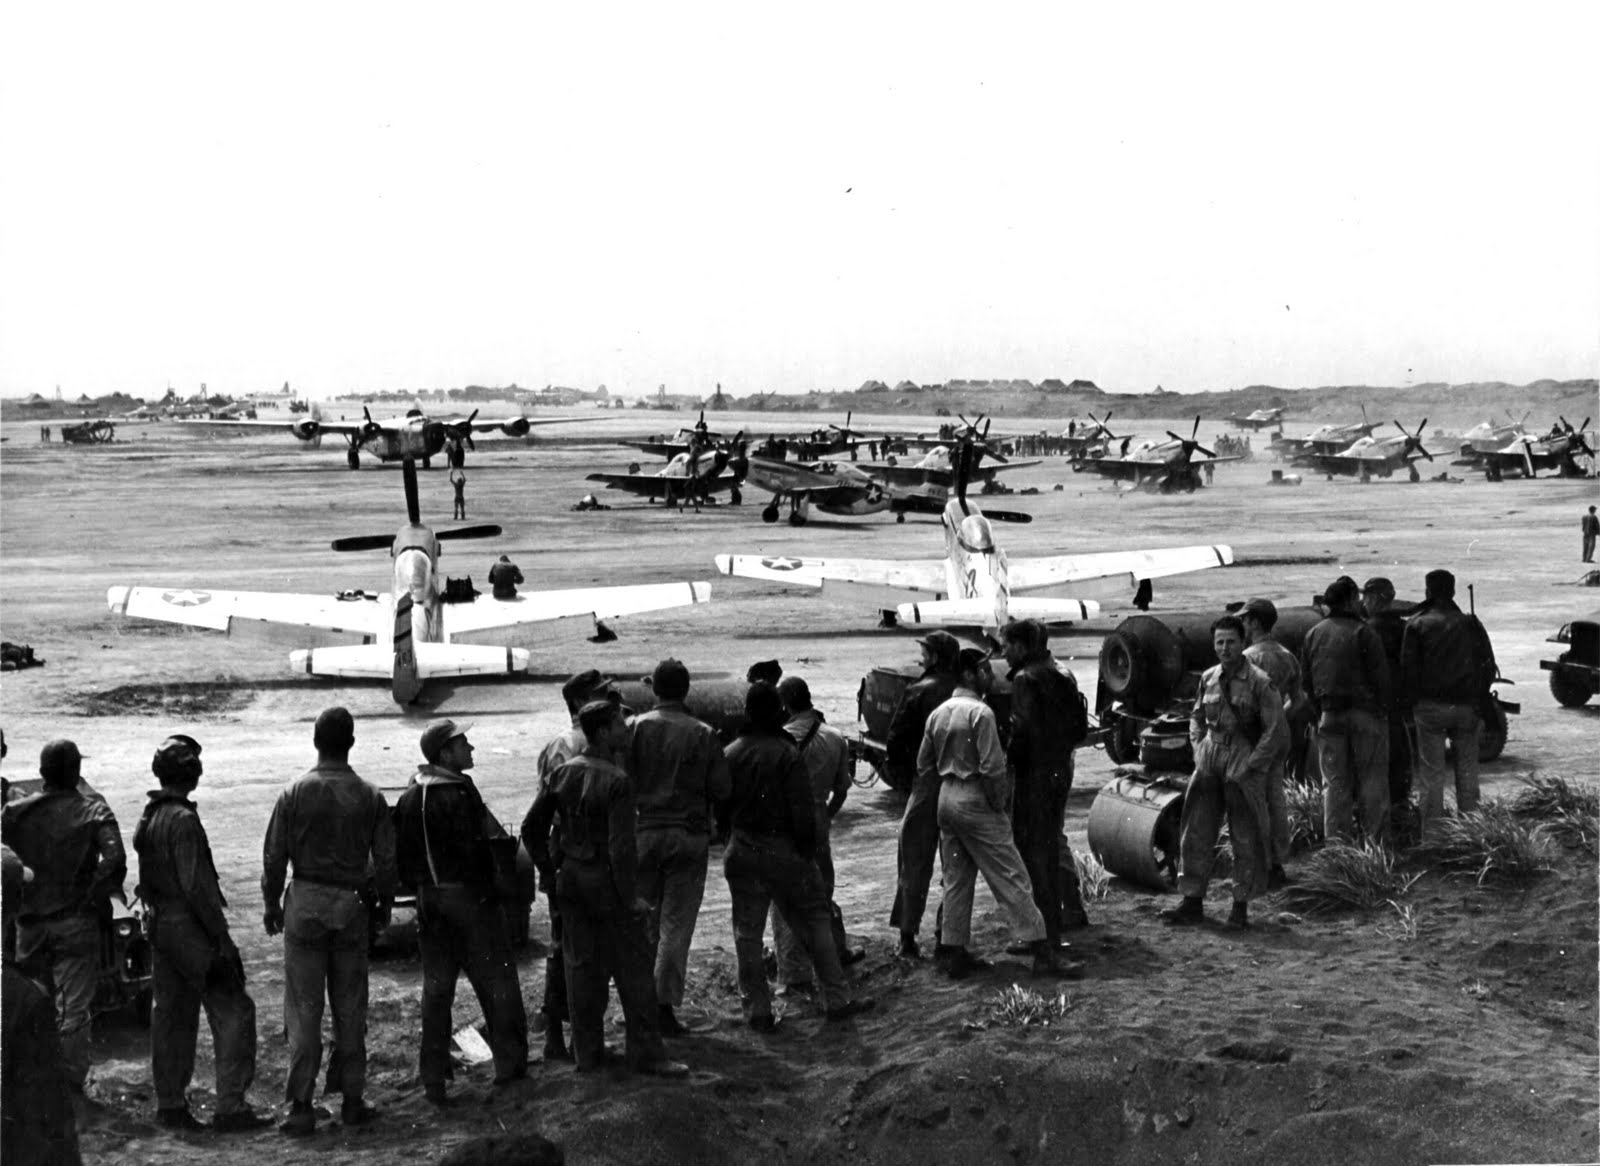 P-51D Mustangs of the 47th & 531st Fighter Squadrons at South Field, Iwo Jima, May-July 1945. Note also the PB4Y-1 Liberator of Navy Patrol Squadron VPB-116.